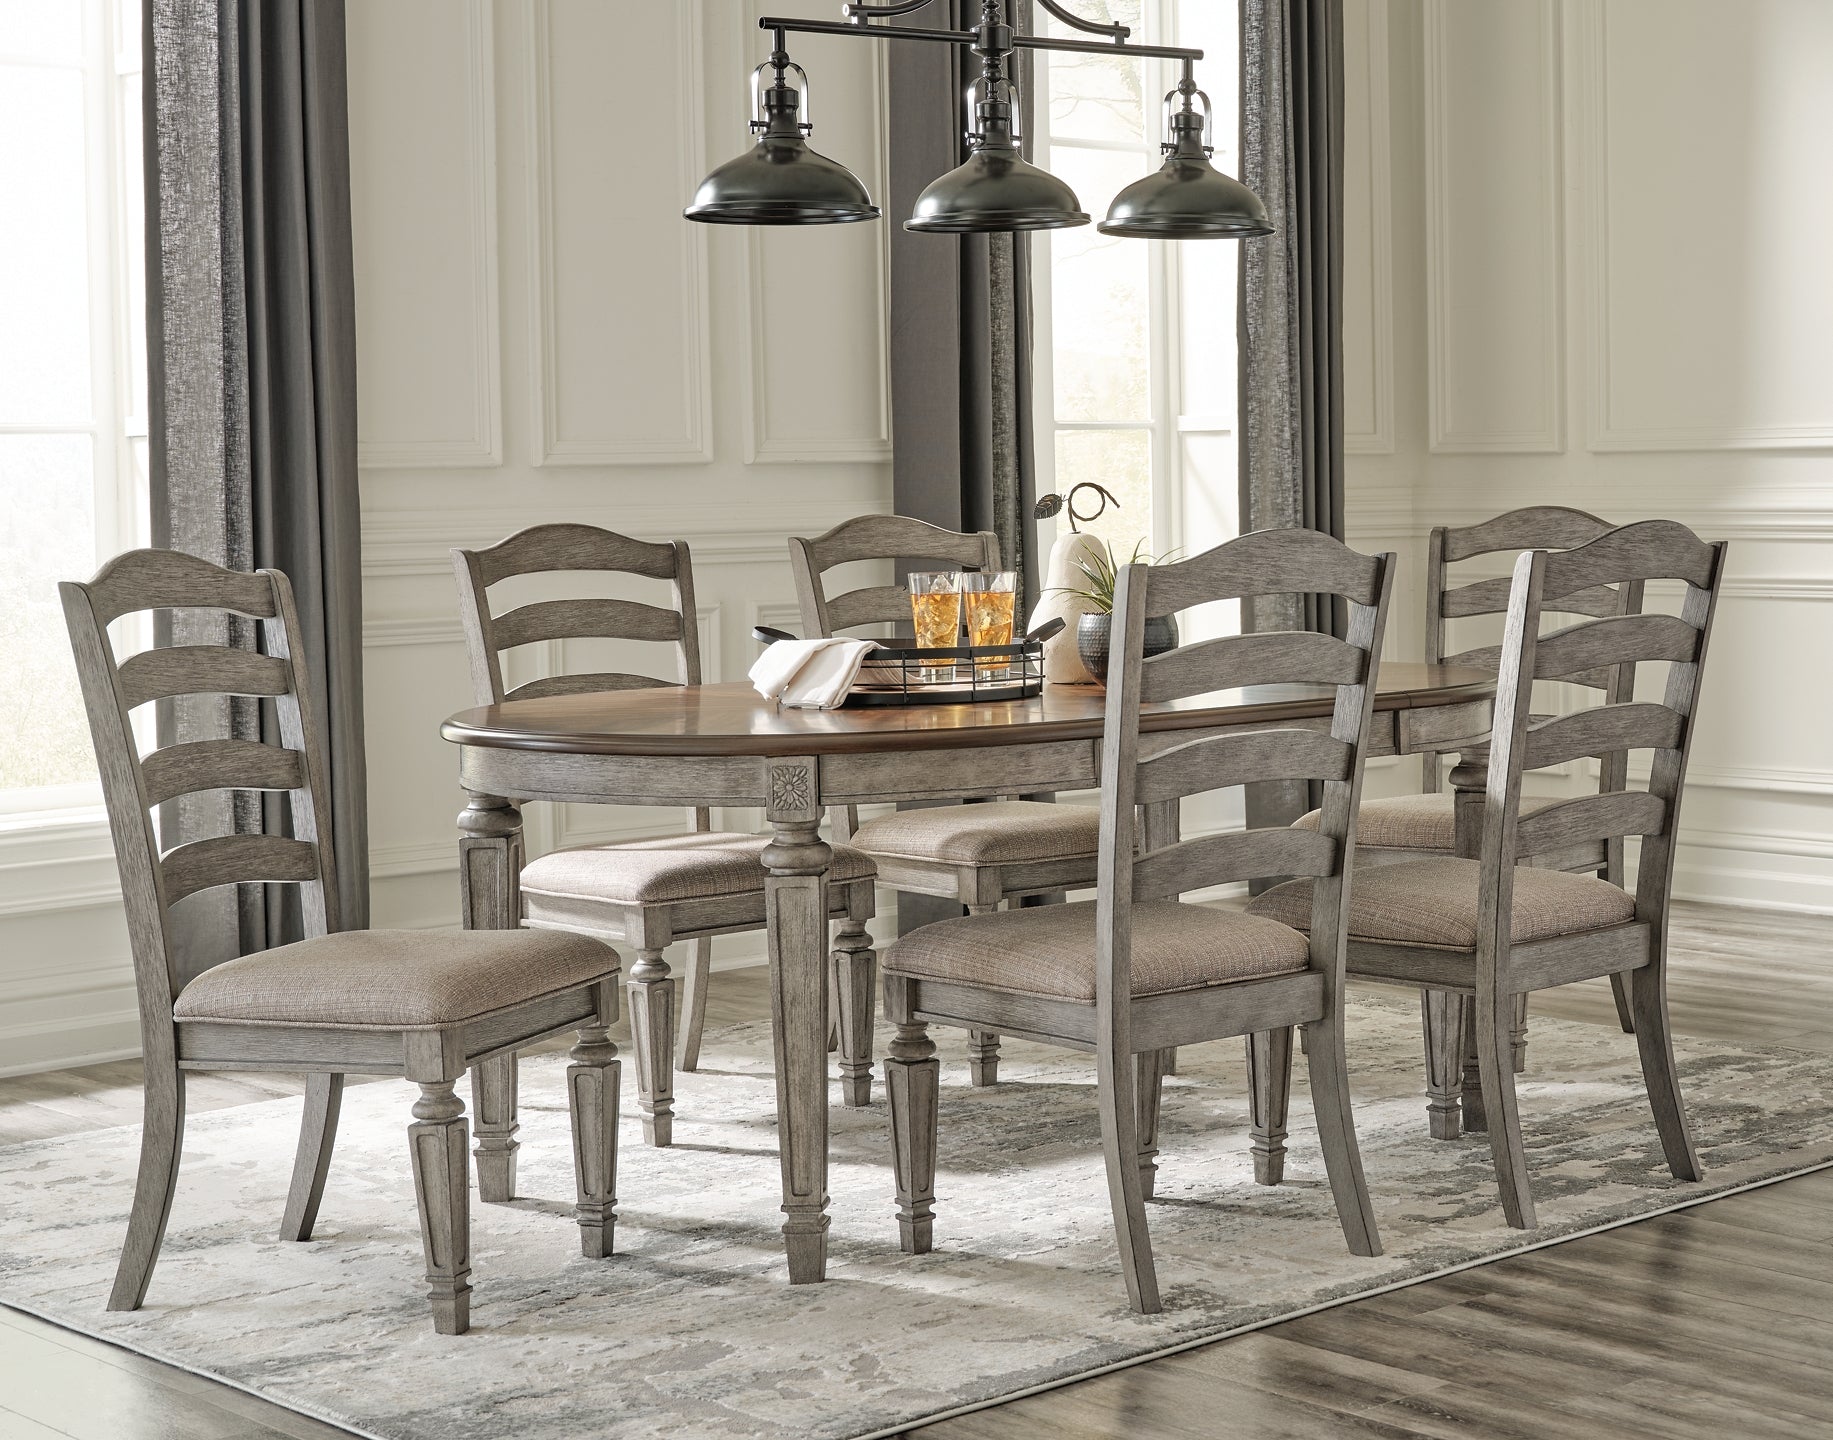 Lodenbay Dining Table and 6 Chairs JB's Furniture  Home Furniture, Home Decor, Furniture Store